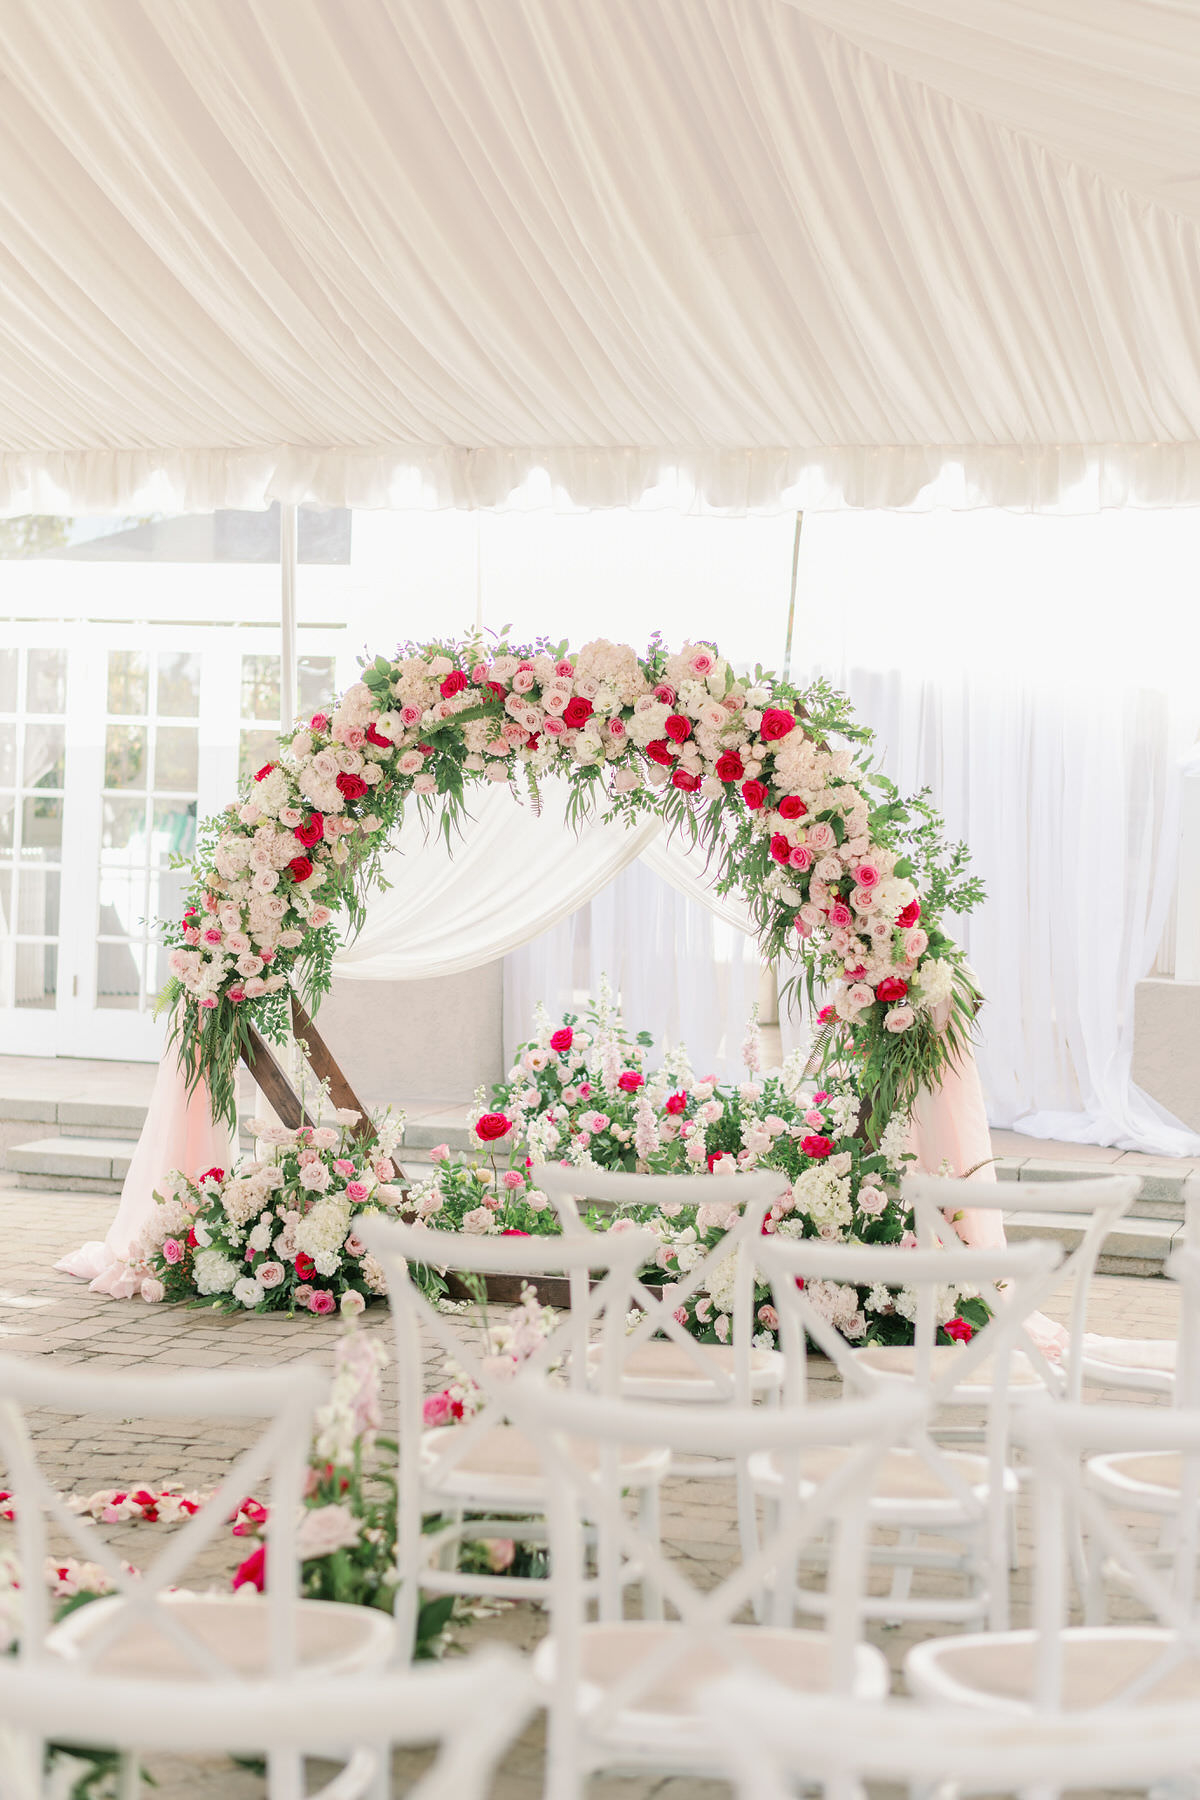 Circular wedding ceremony arch with flowers - Peony Park Photography